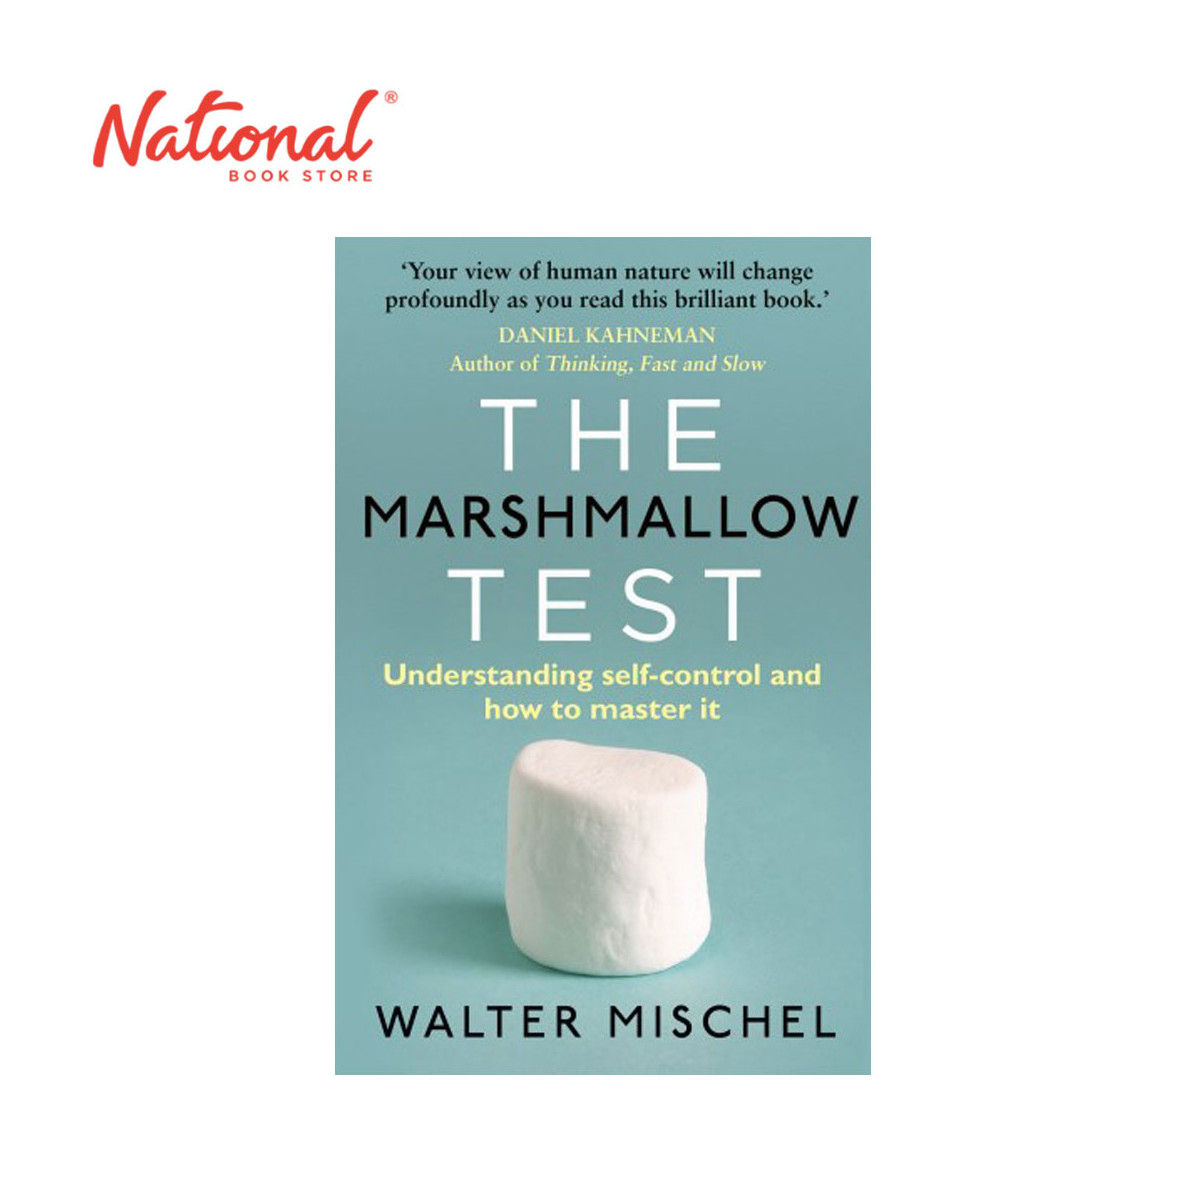 The Marshmallow Test by Walter Mischel - Trade Paperback - Non-Fiction - References